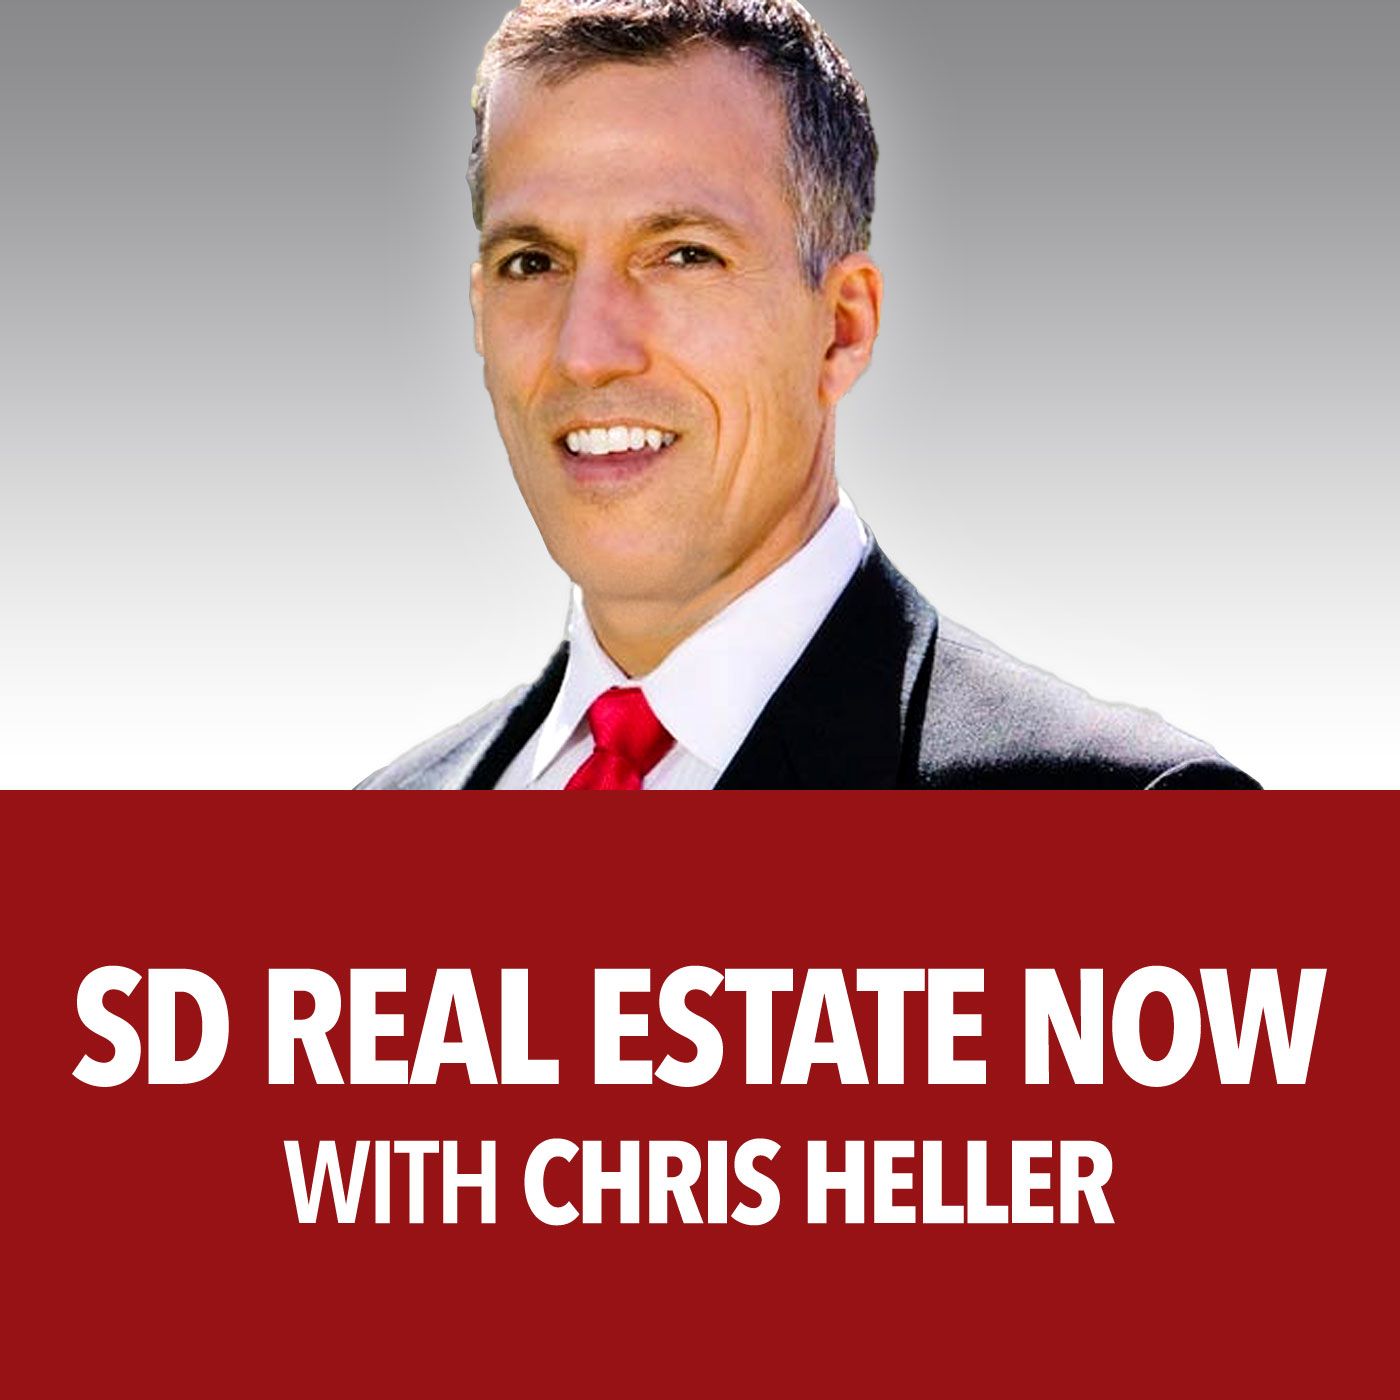 SD Real Estate Now With Chris Heller